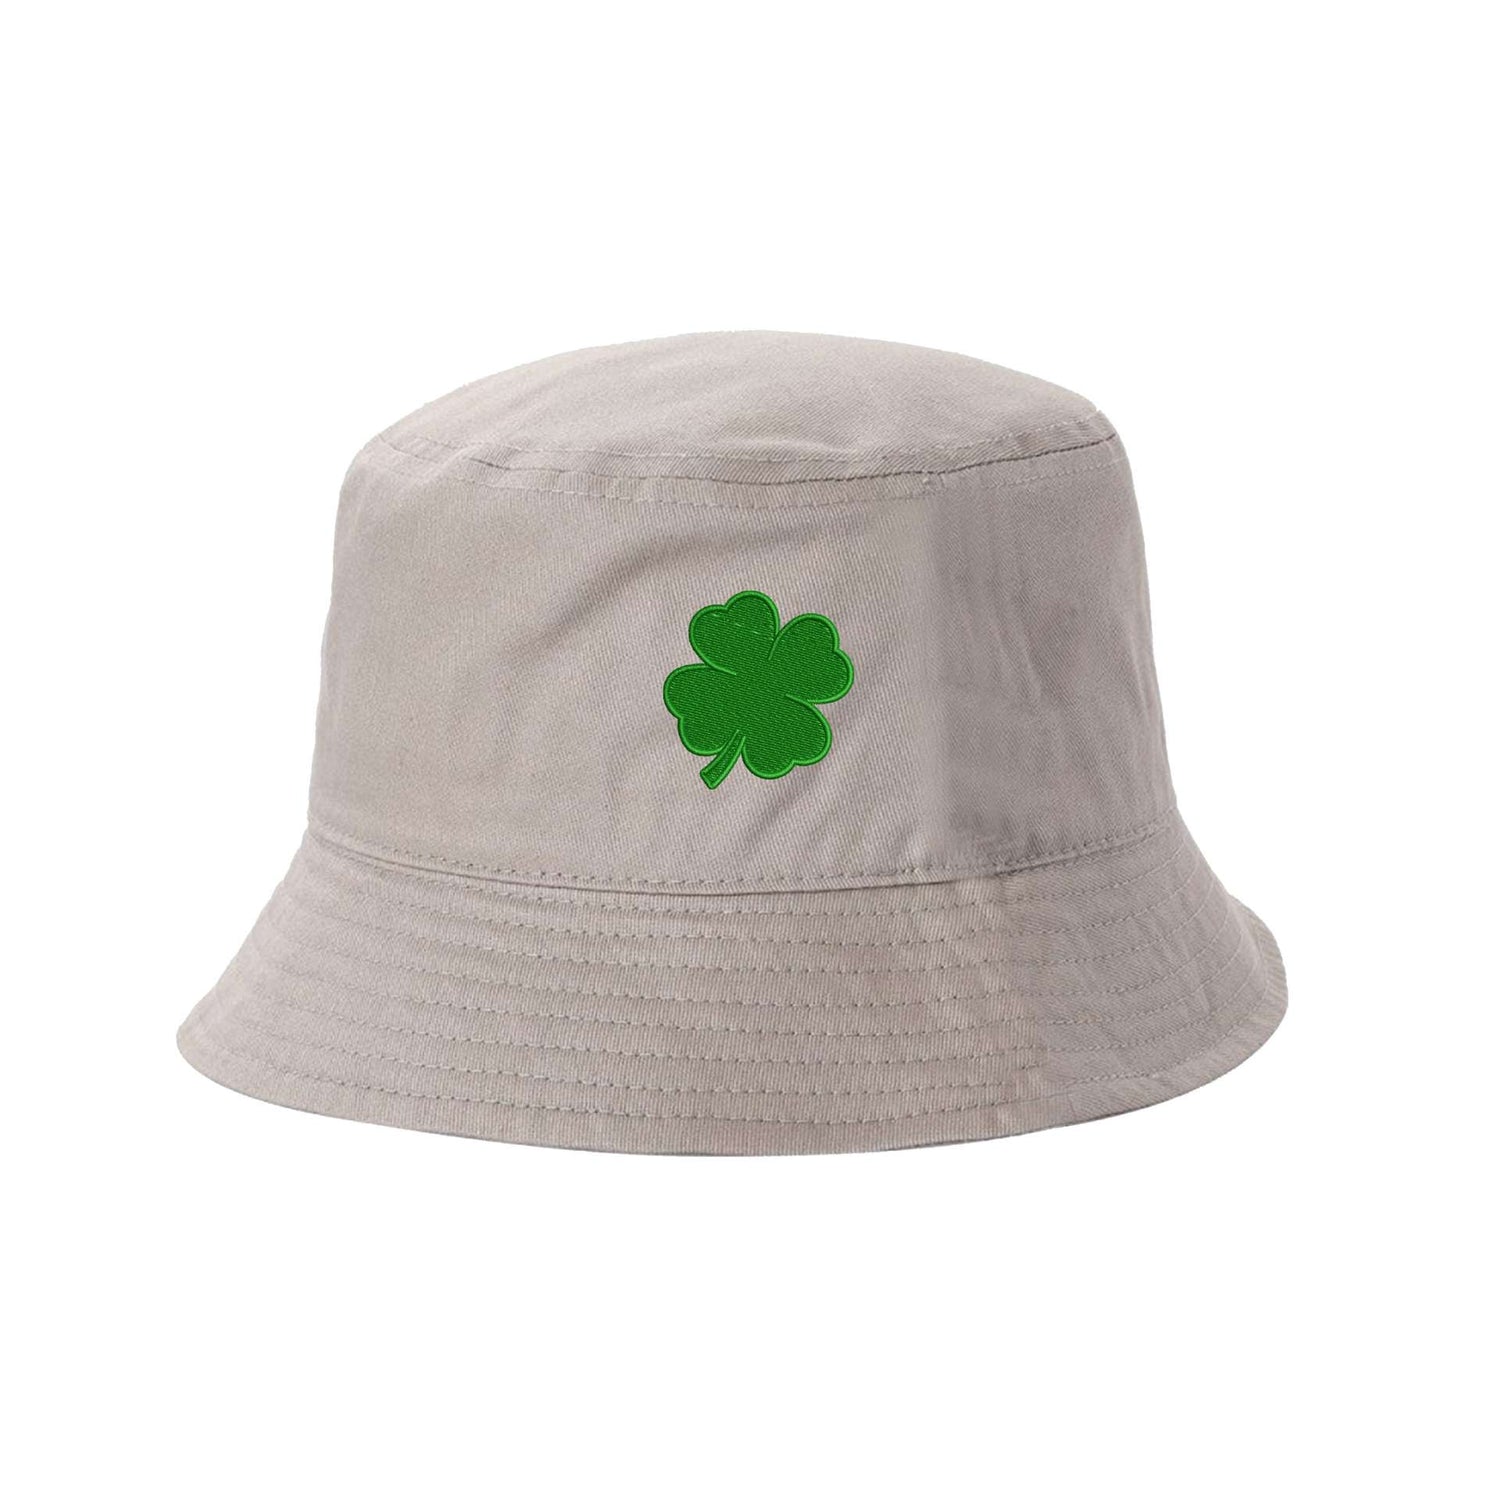 khaki bucket hat embroidered with a green four leaf clover- DSY Lifestyle